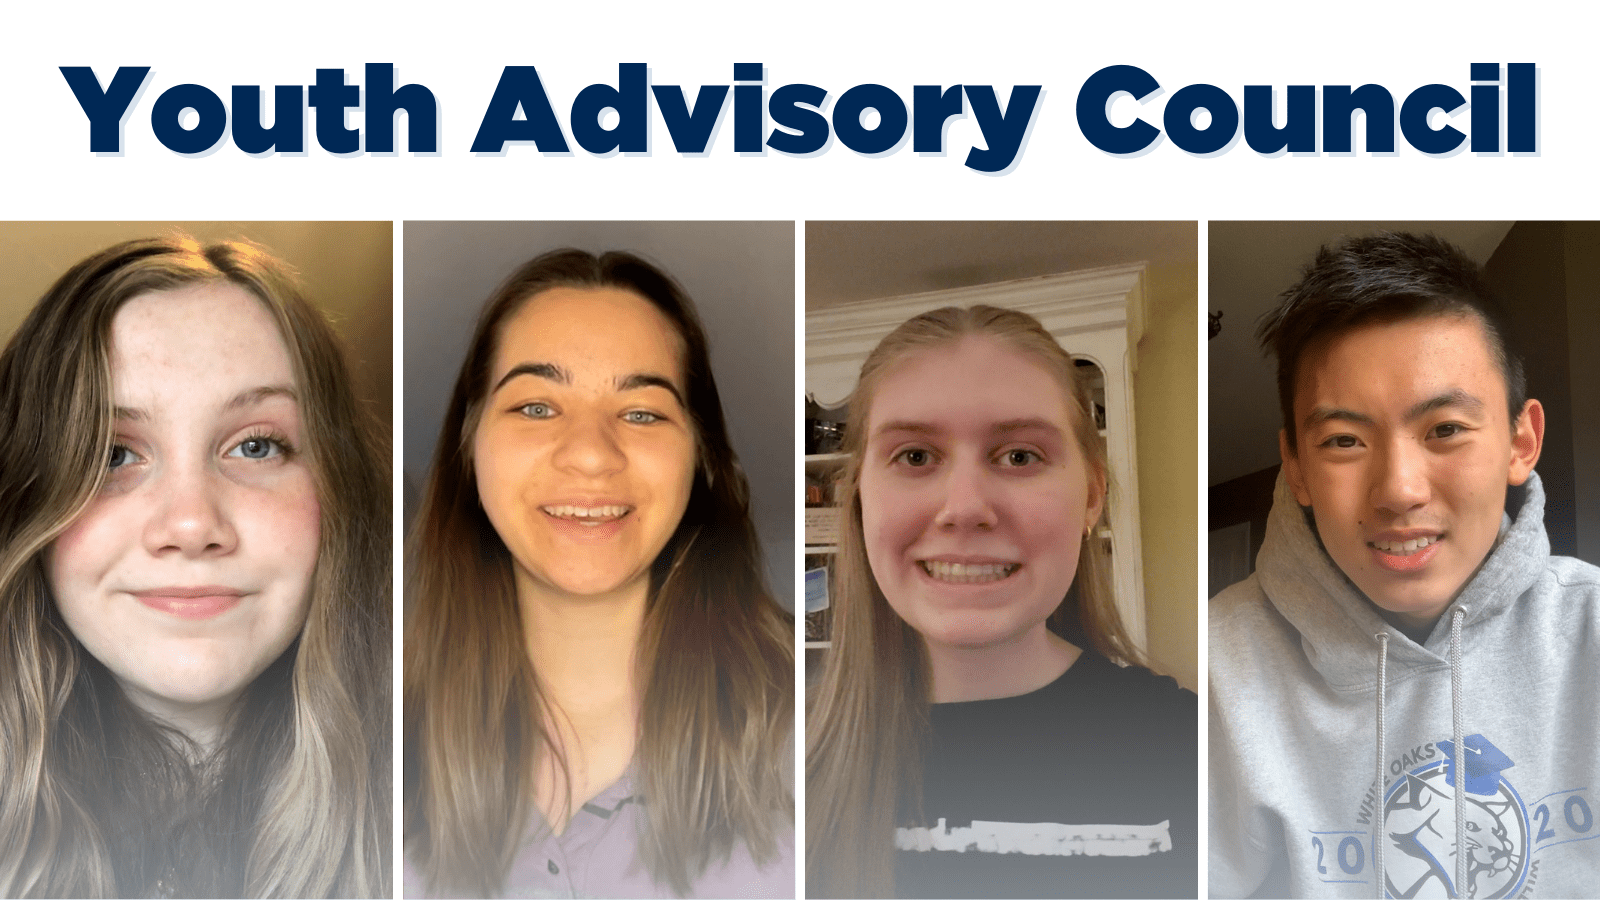 Collage image of four members of the youth advisory council. From left to right: Raynham, Megan, Illyria, and Eric.